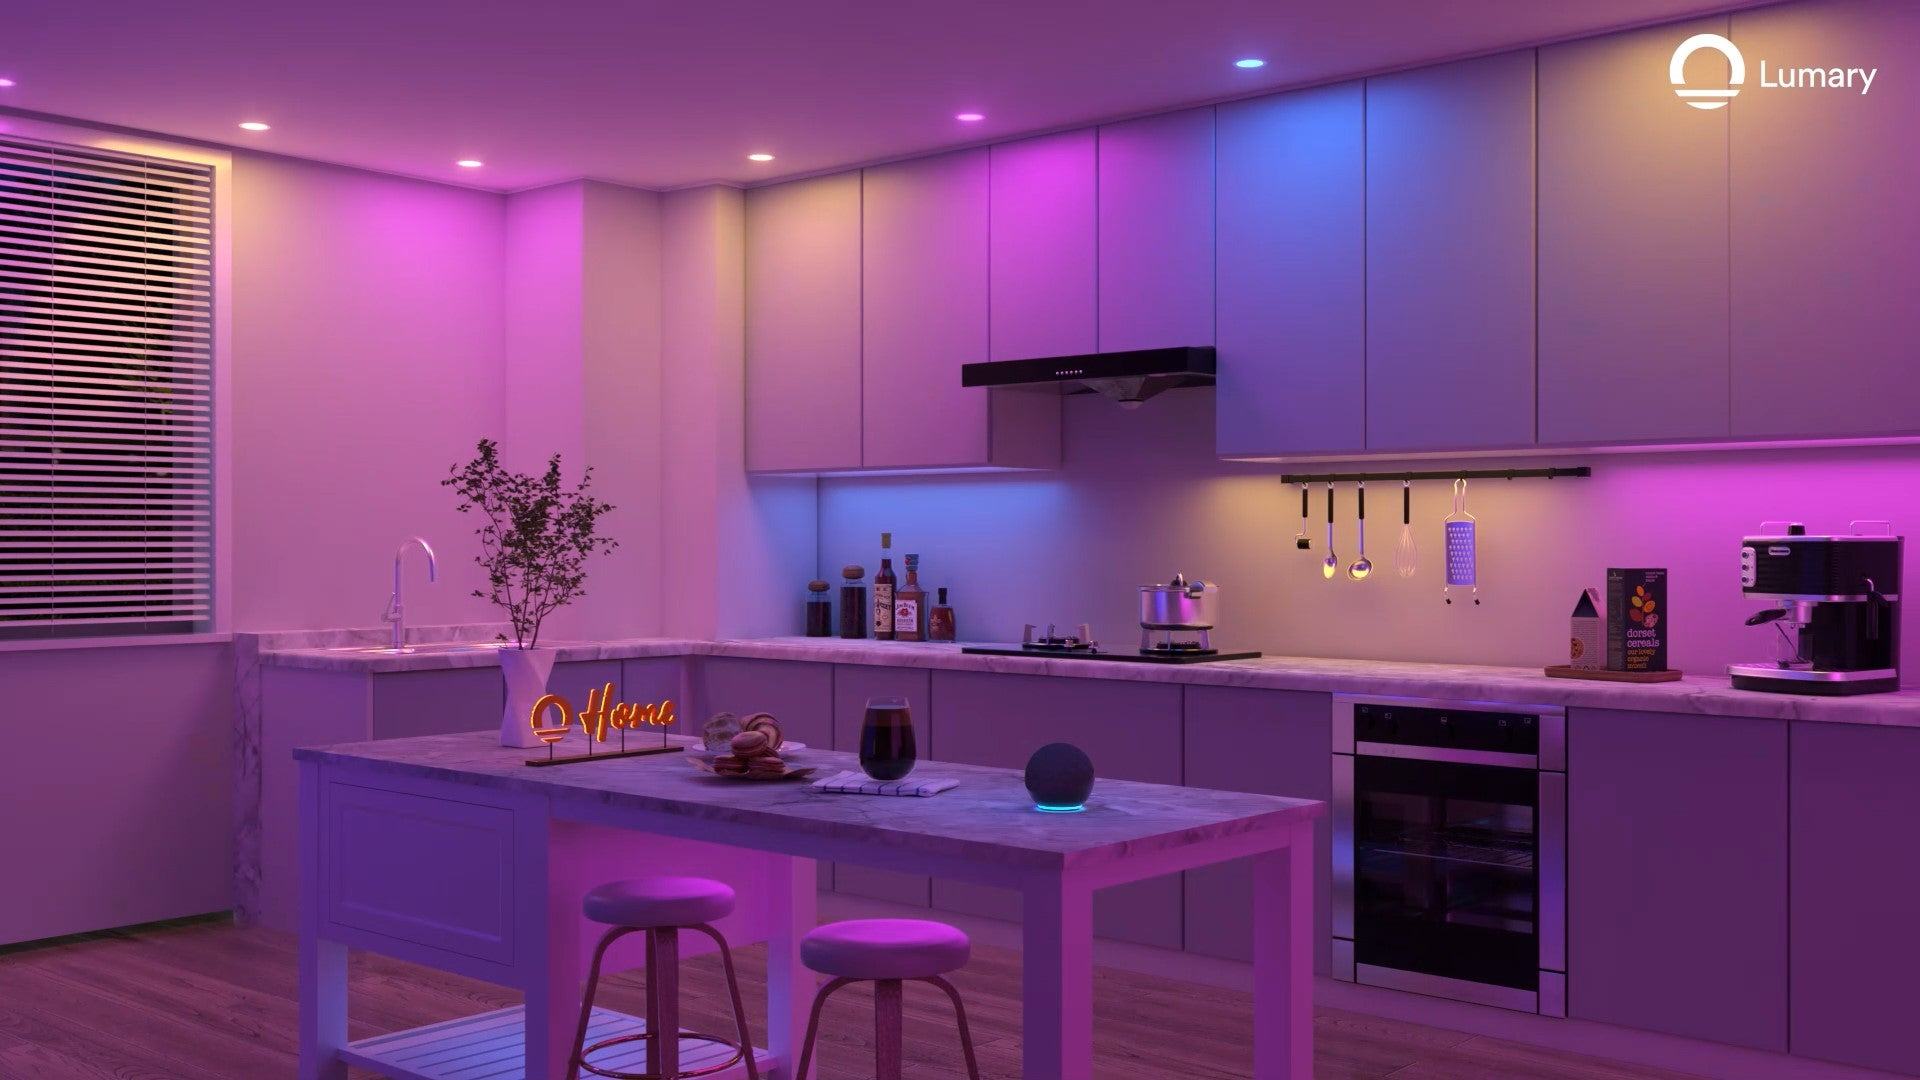 Lumary LED can help you make your home smarter - Lumary